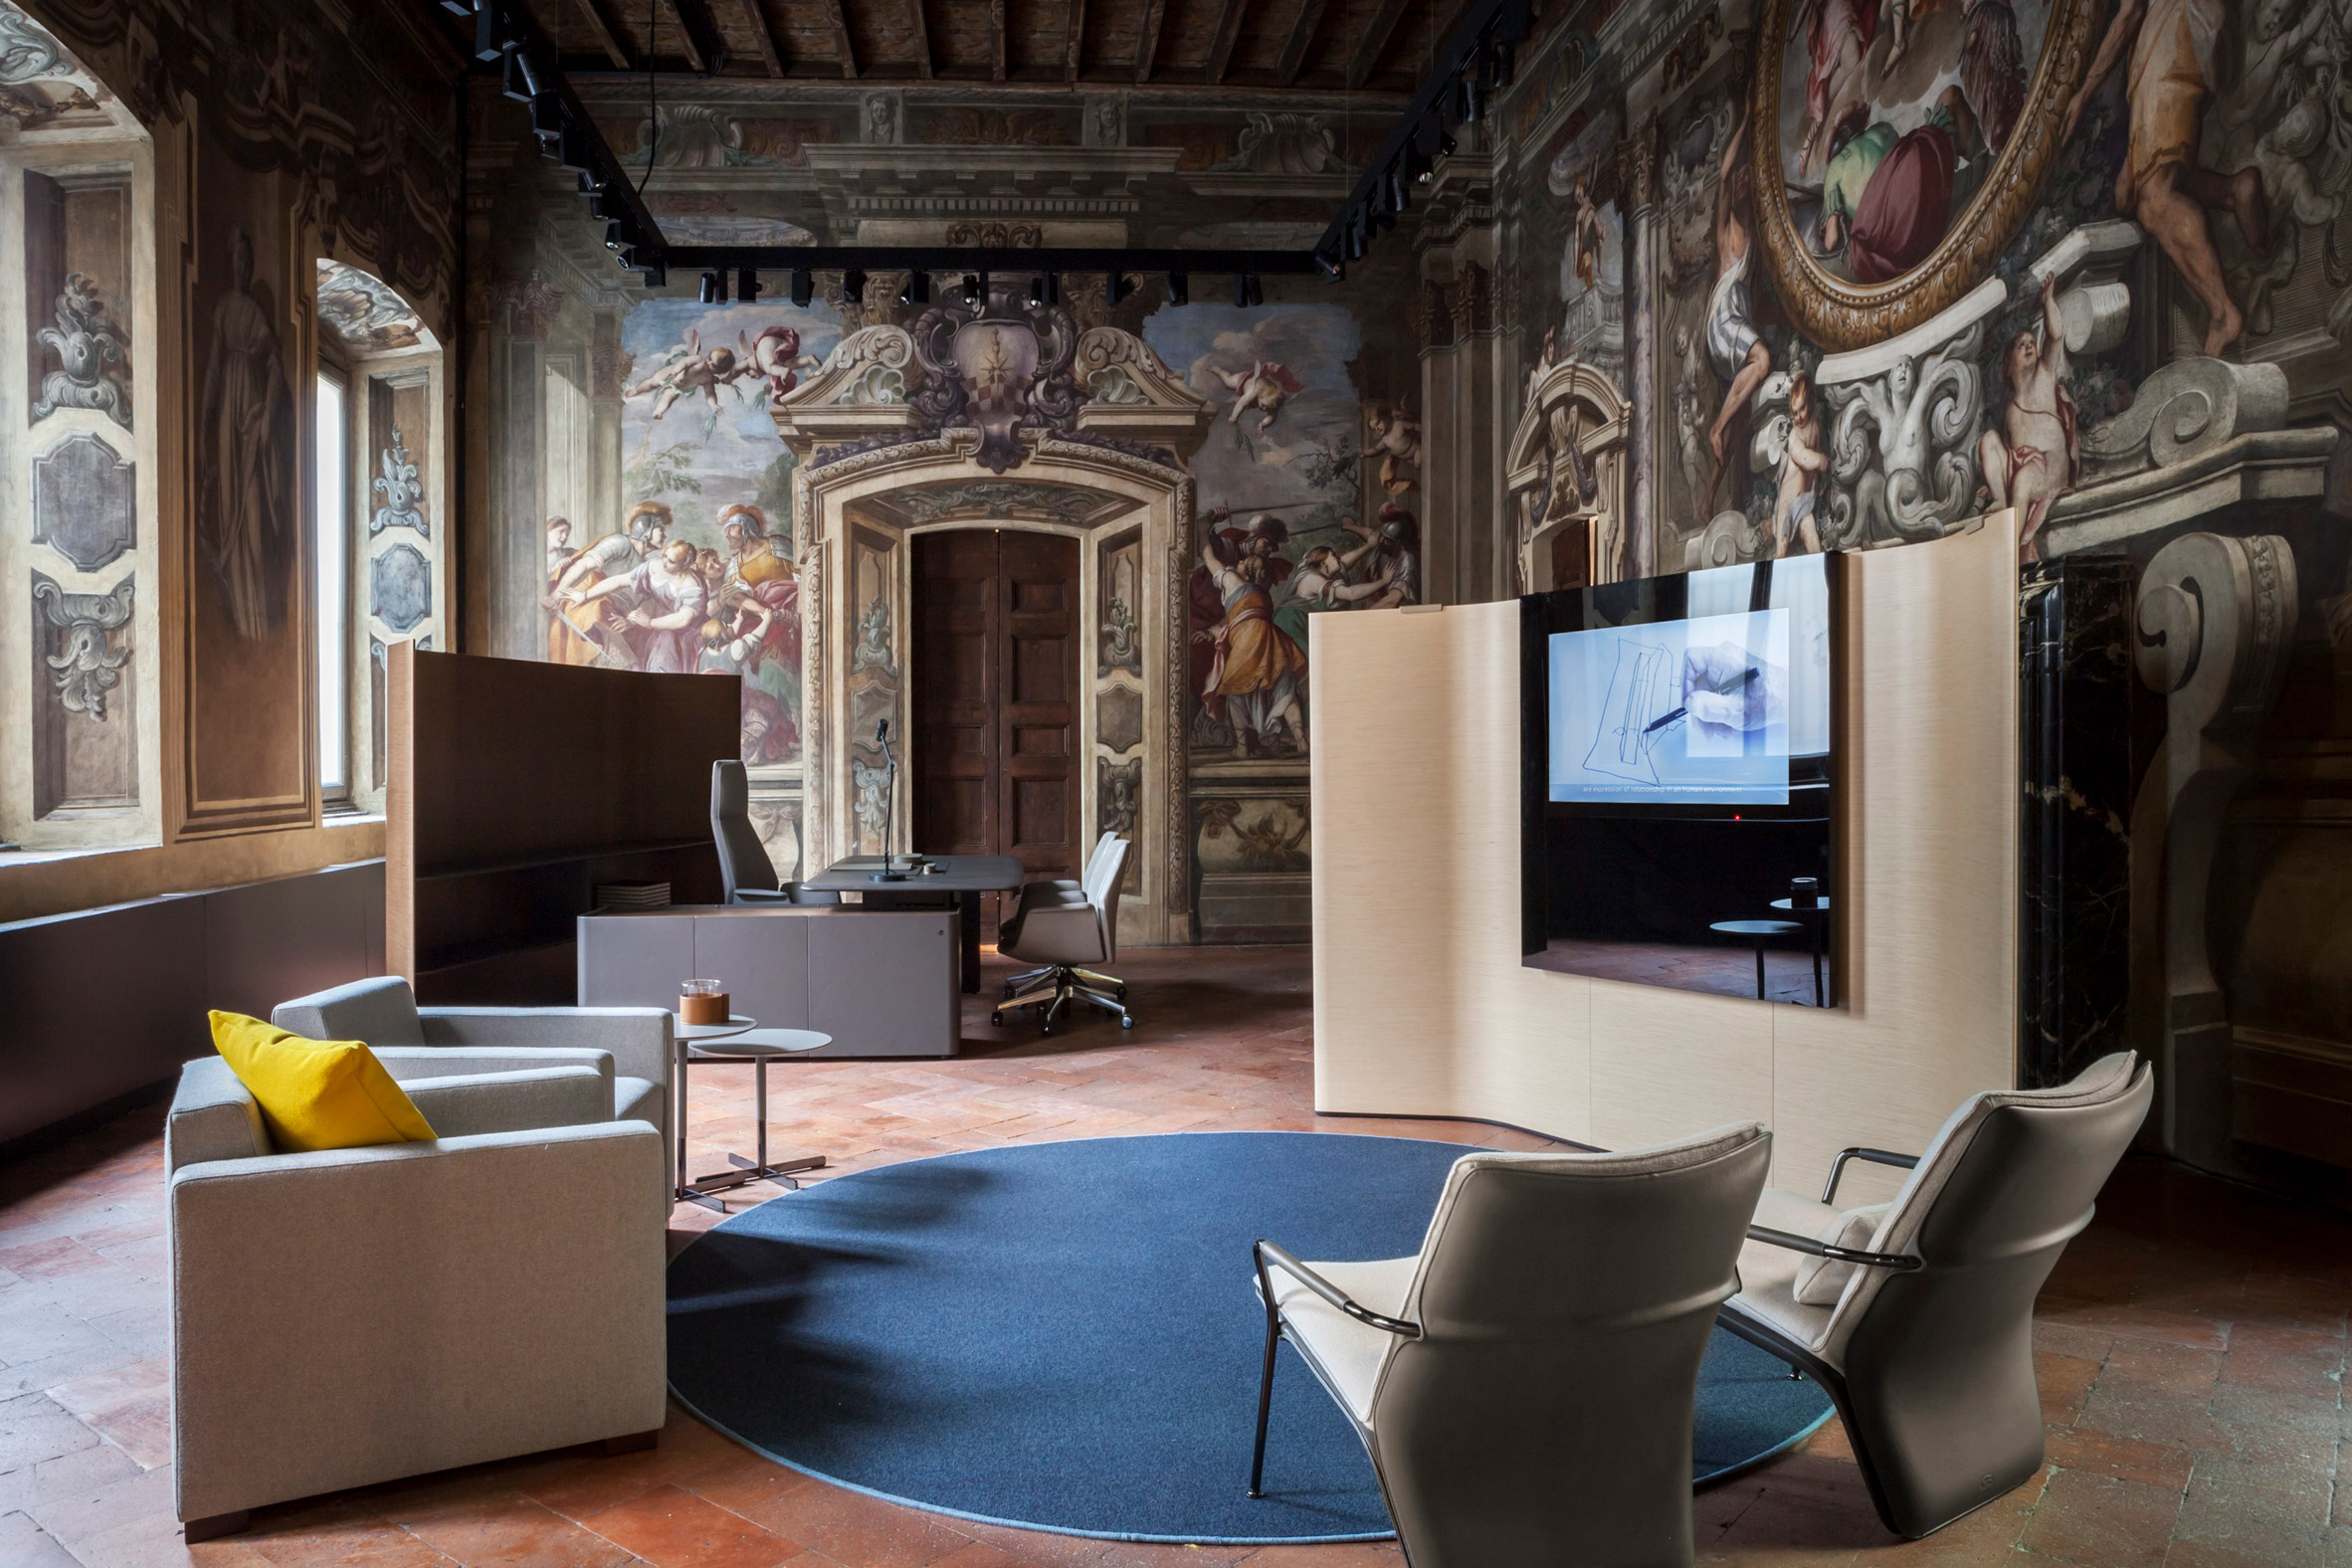 Michele De Lucchi takes over Poltrona Frau showroom for Milan Design Week